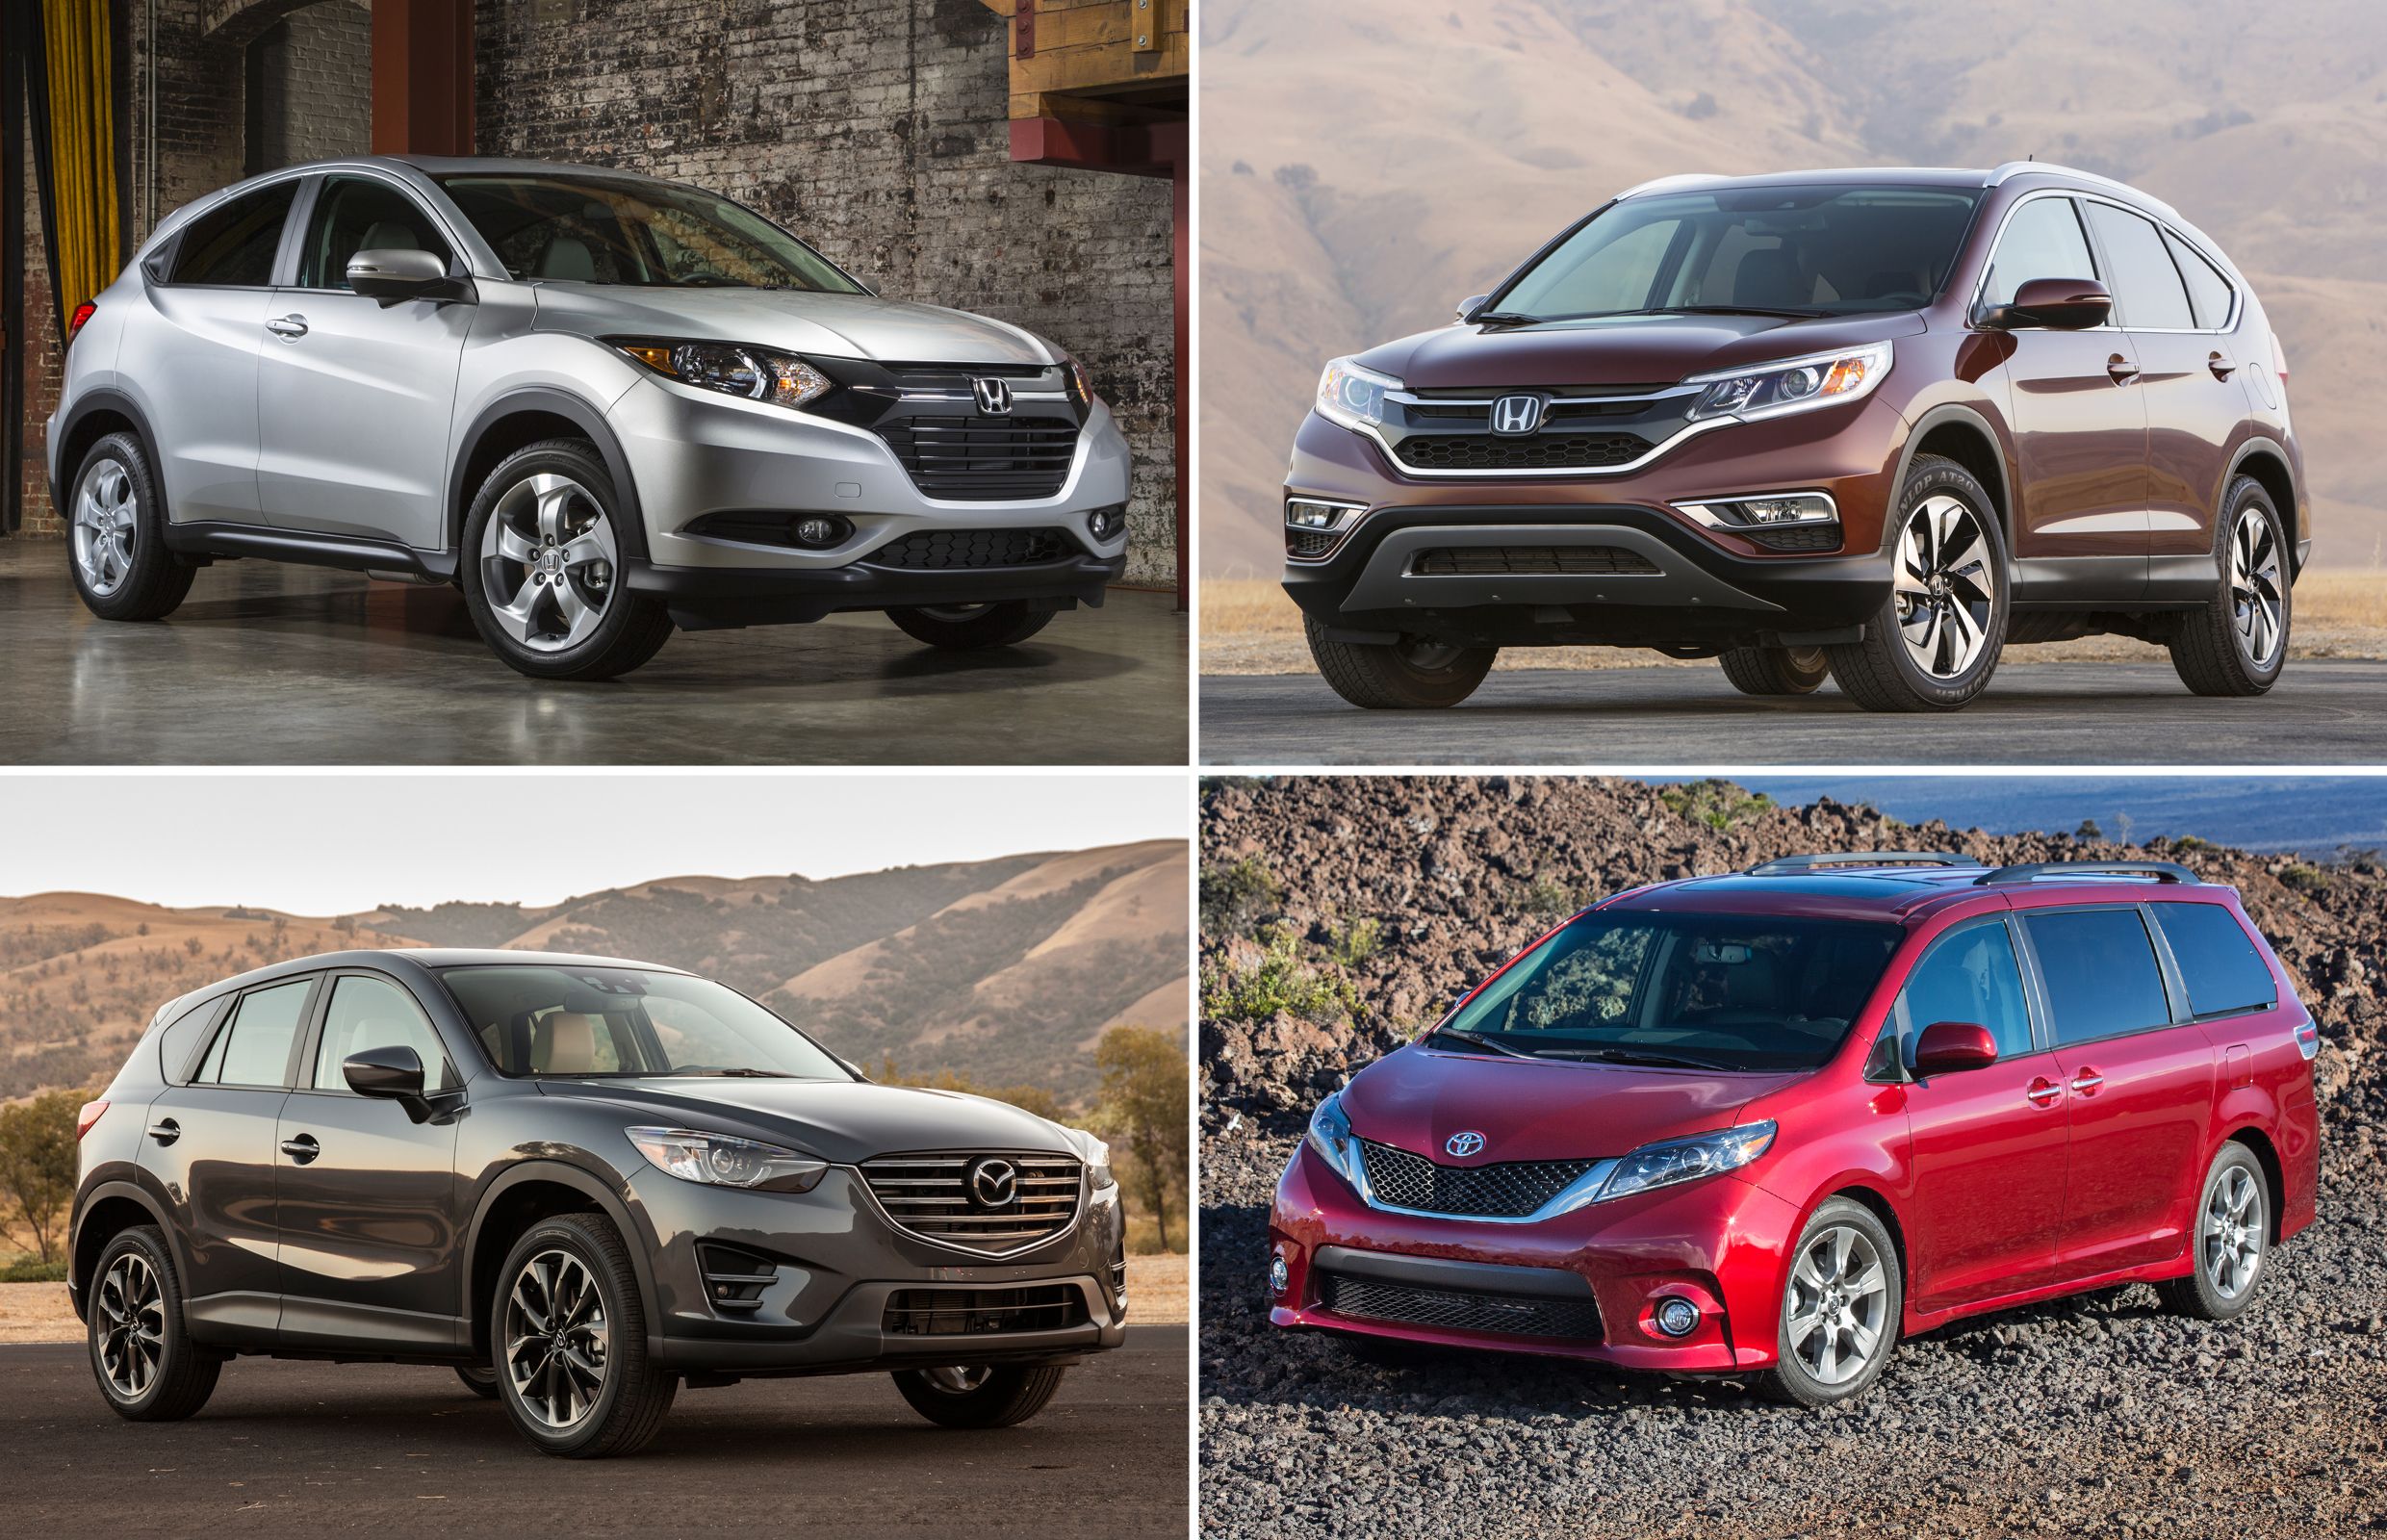 Want a Honda CR-V? Check out these three choices first